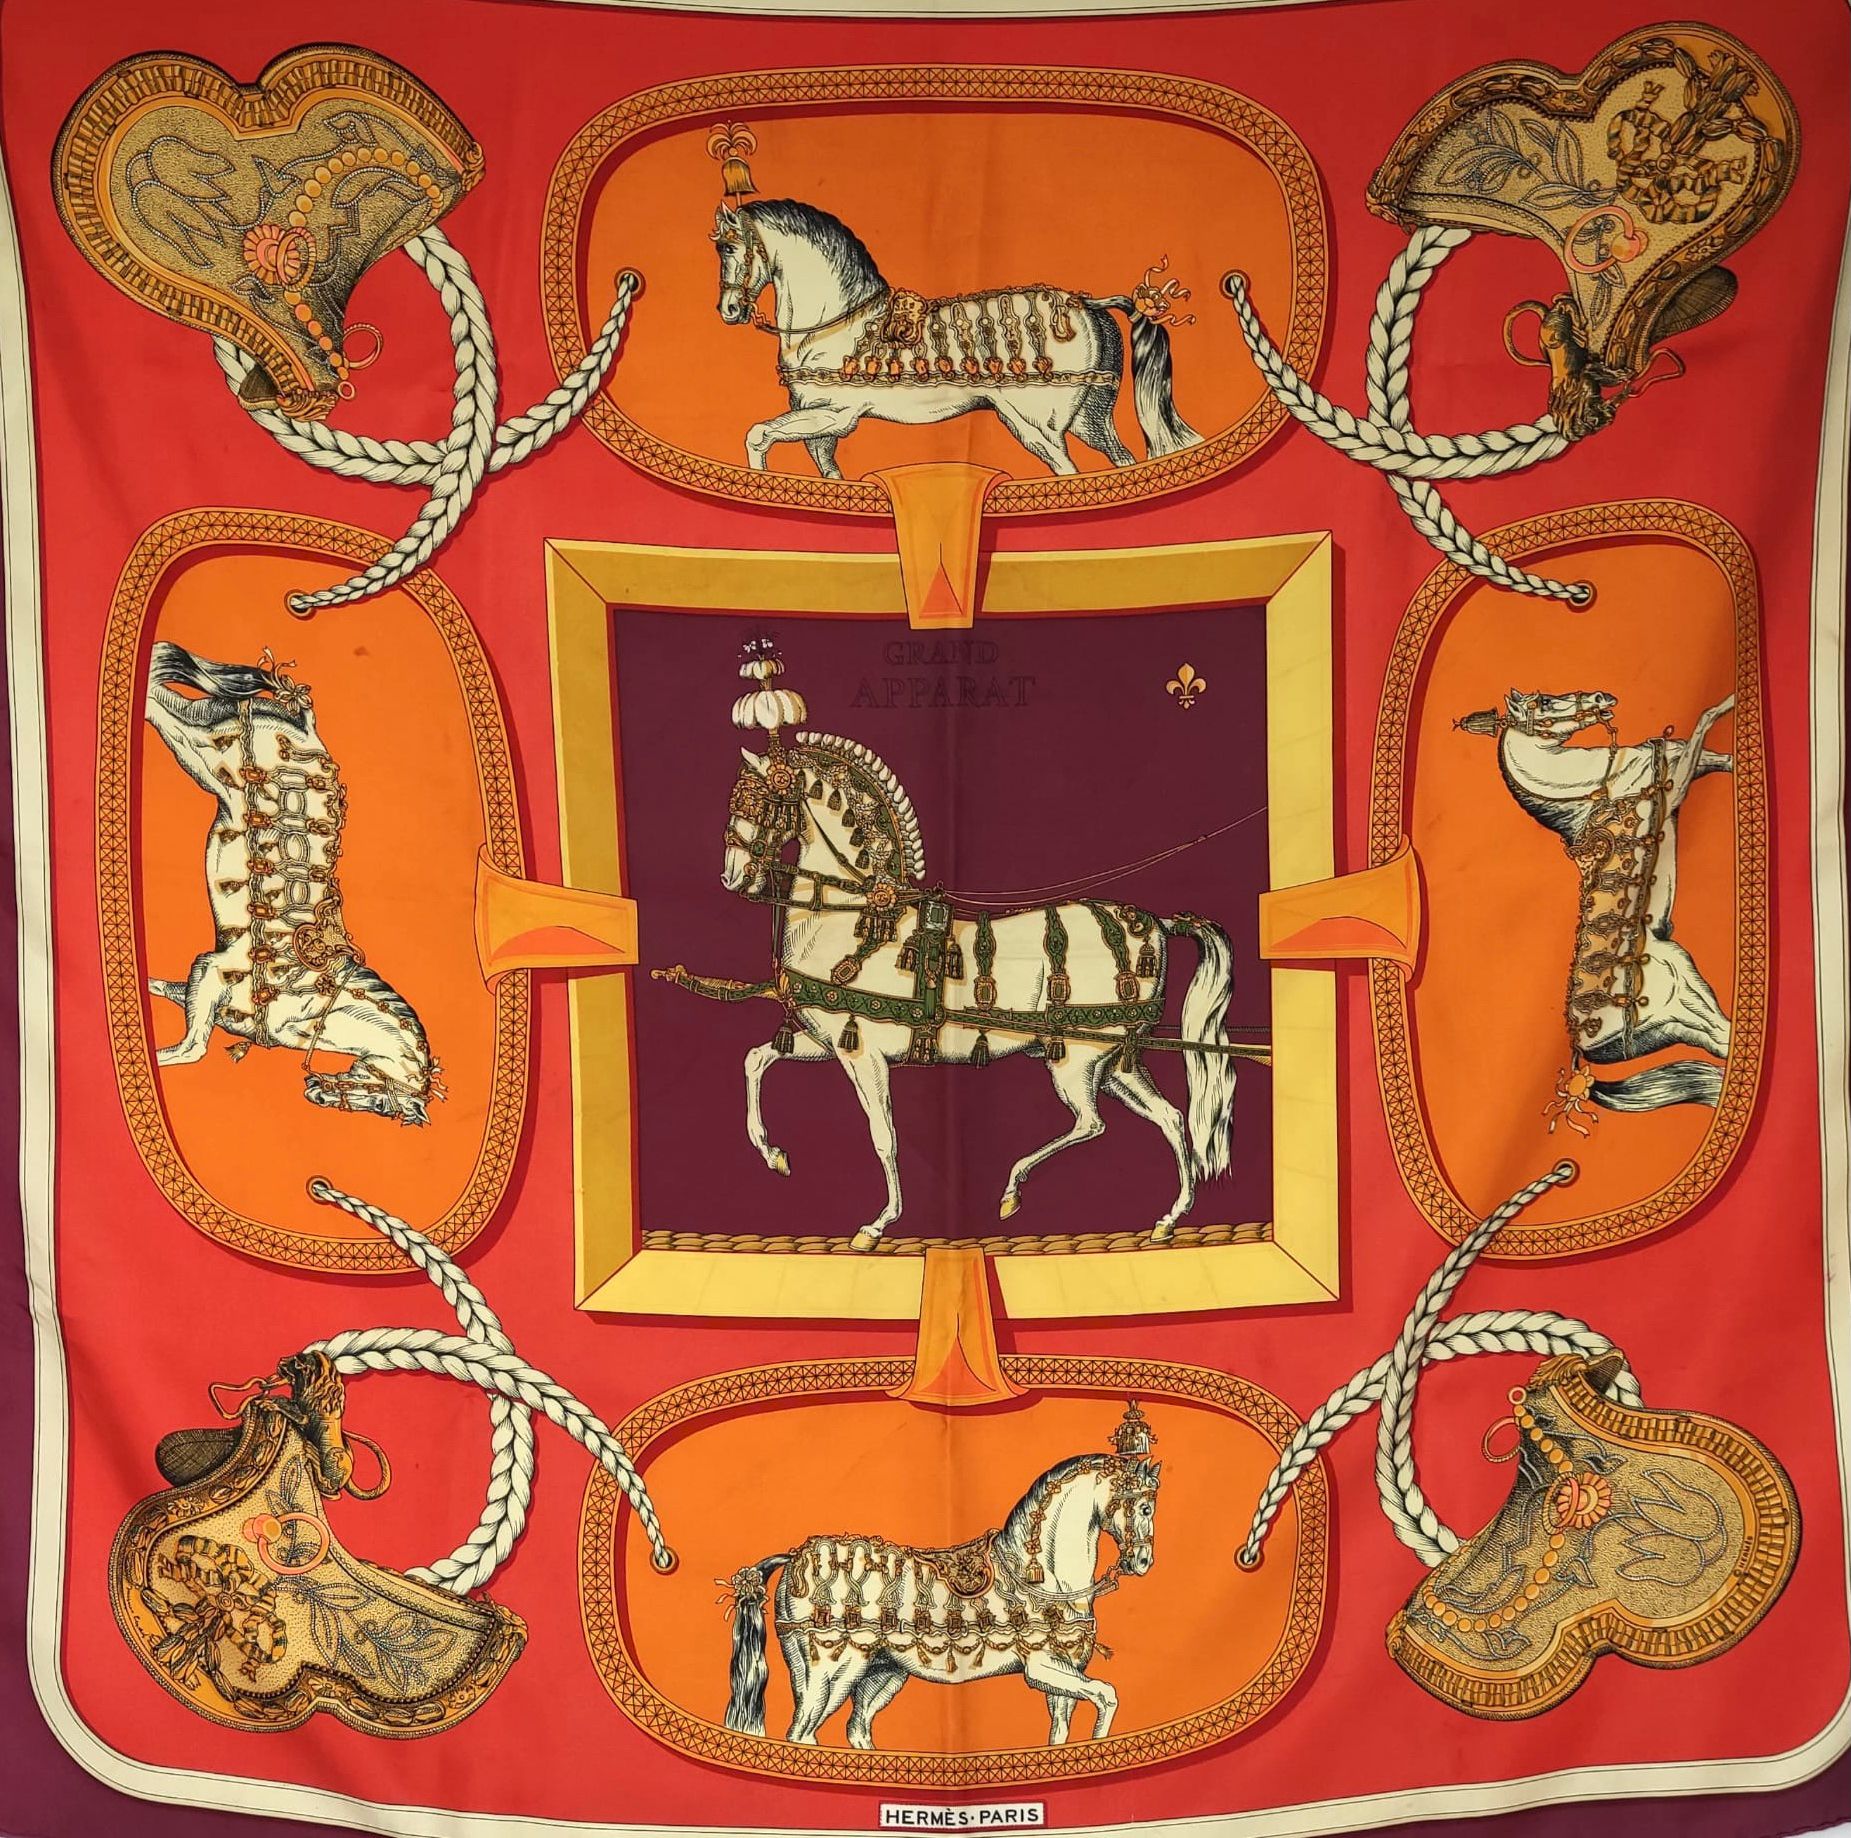 Null HERMES Silk scarf model "Grand Apparat" Box. Stains.